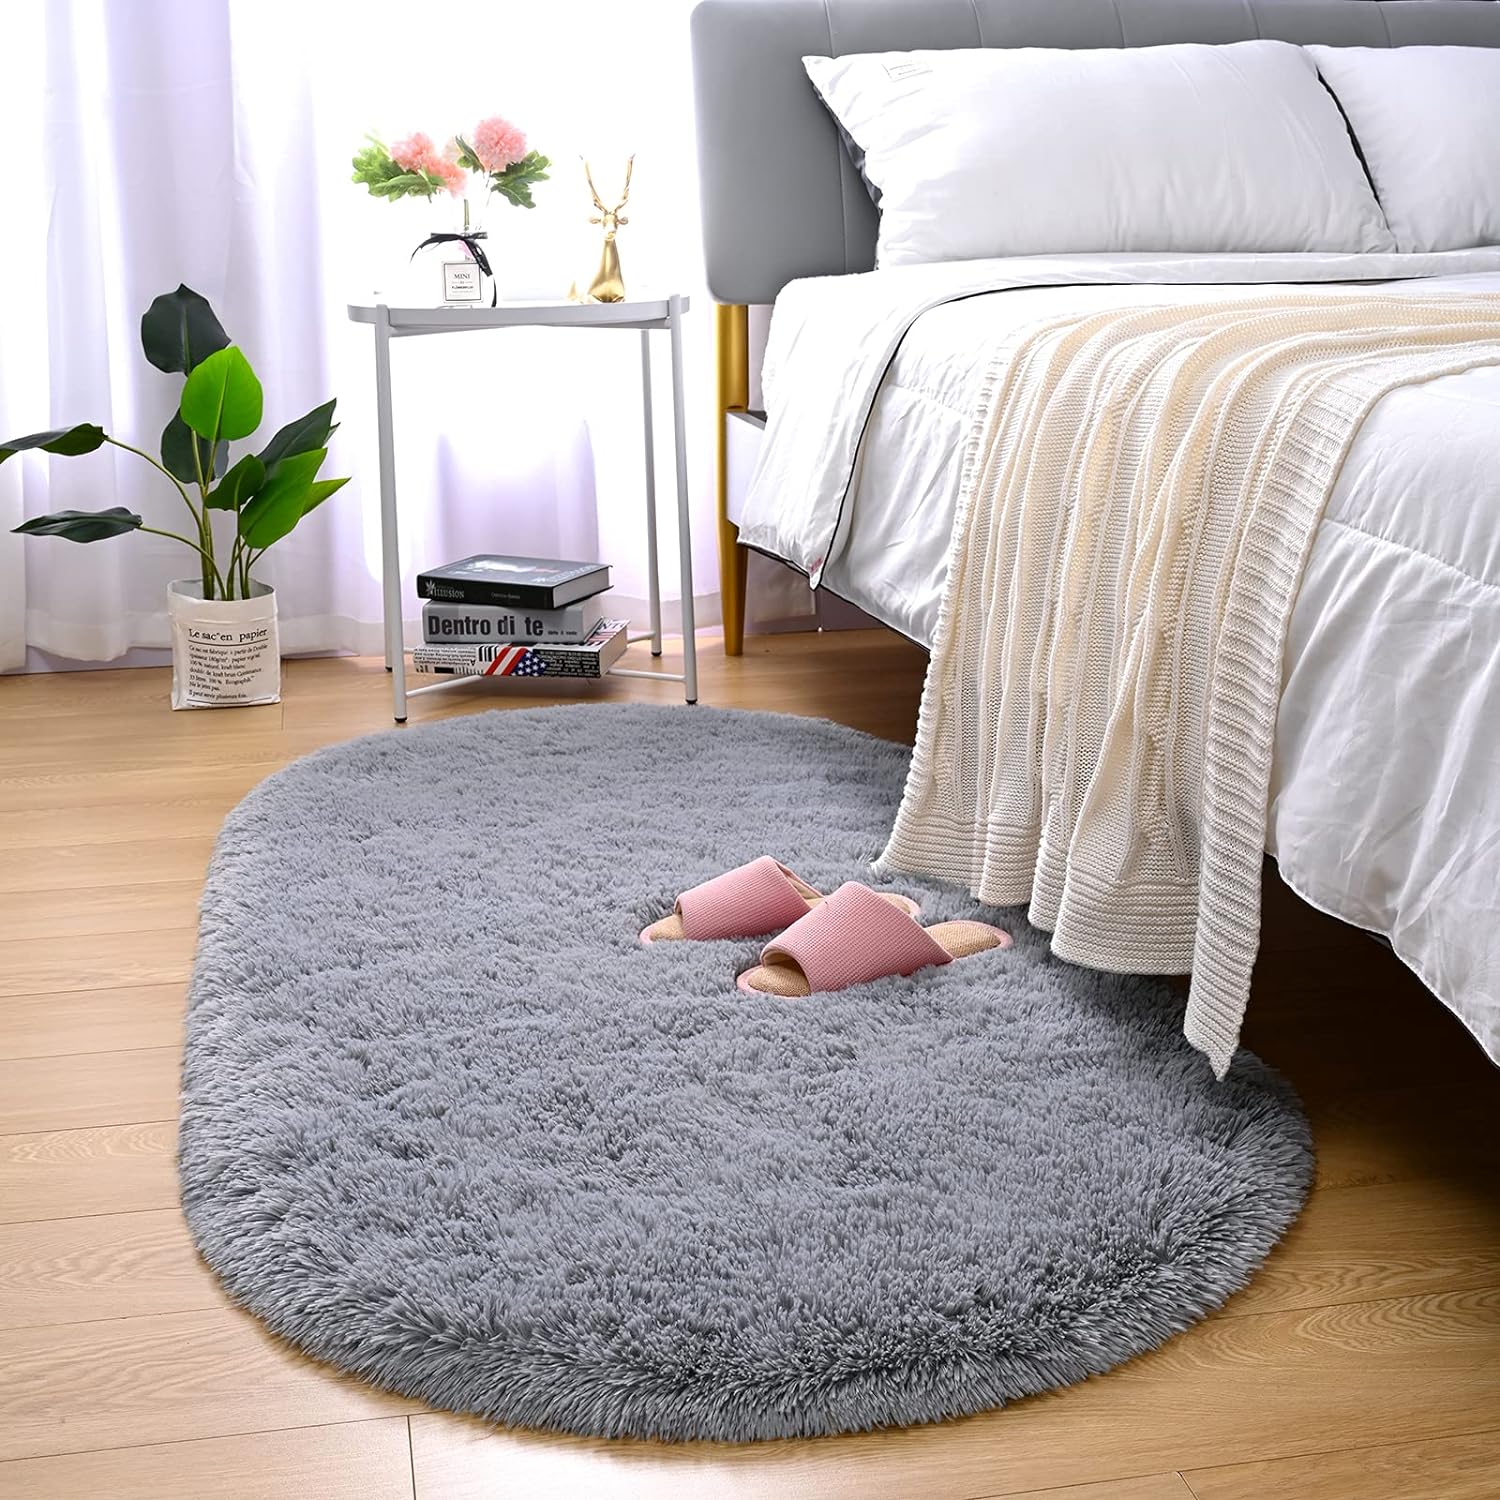 Merelax Soft Shaggy Rug for Kids Bedroom, Oval 2.6 x5.3 ft Grey Plush Fluffy Carpets for Living Room, Furry Carpet for Teen Girls Room, Anti-Skid Fuzzy Comfy Rug for Nursery Decor Cute Baby Play Mat